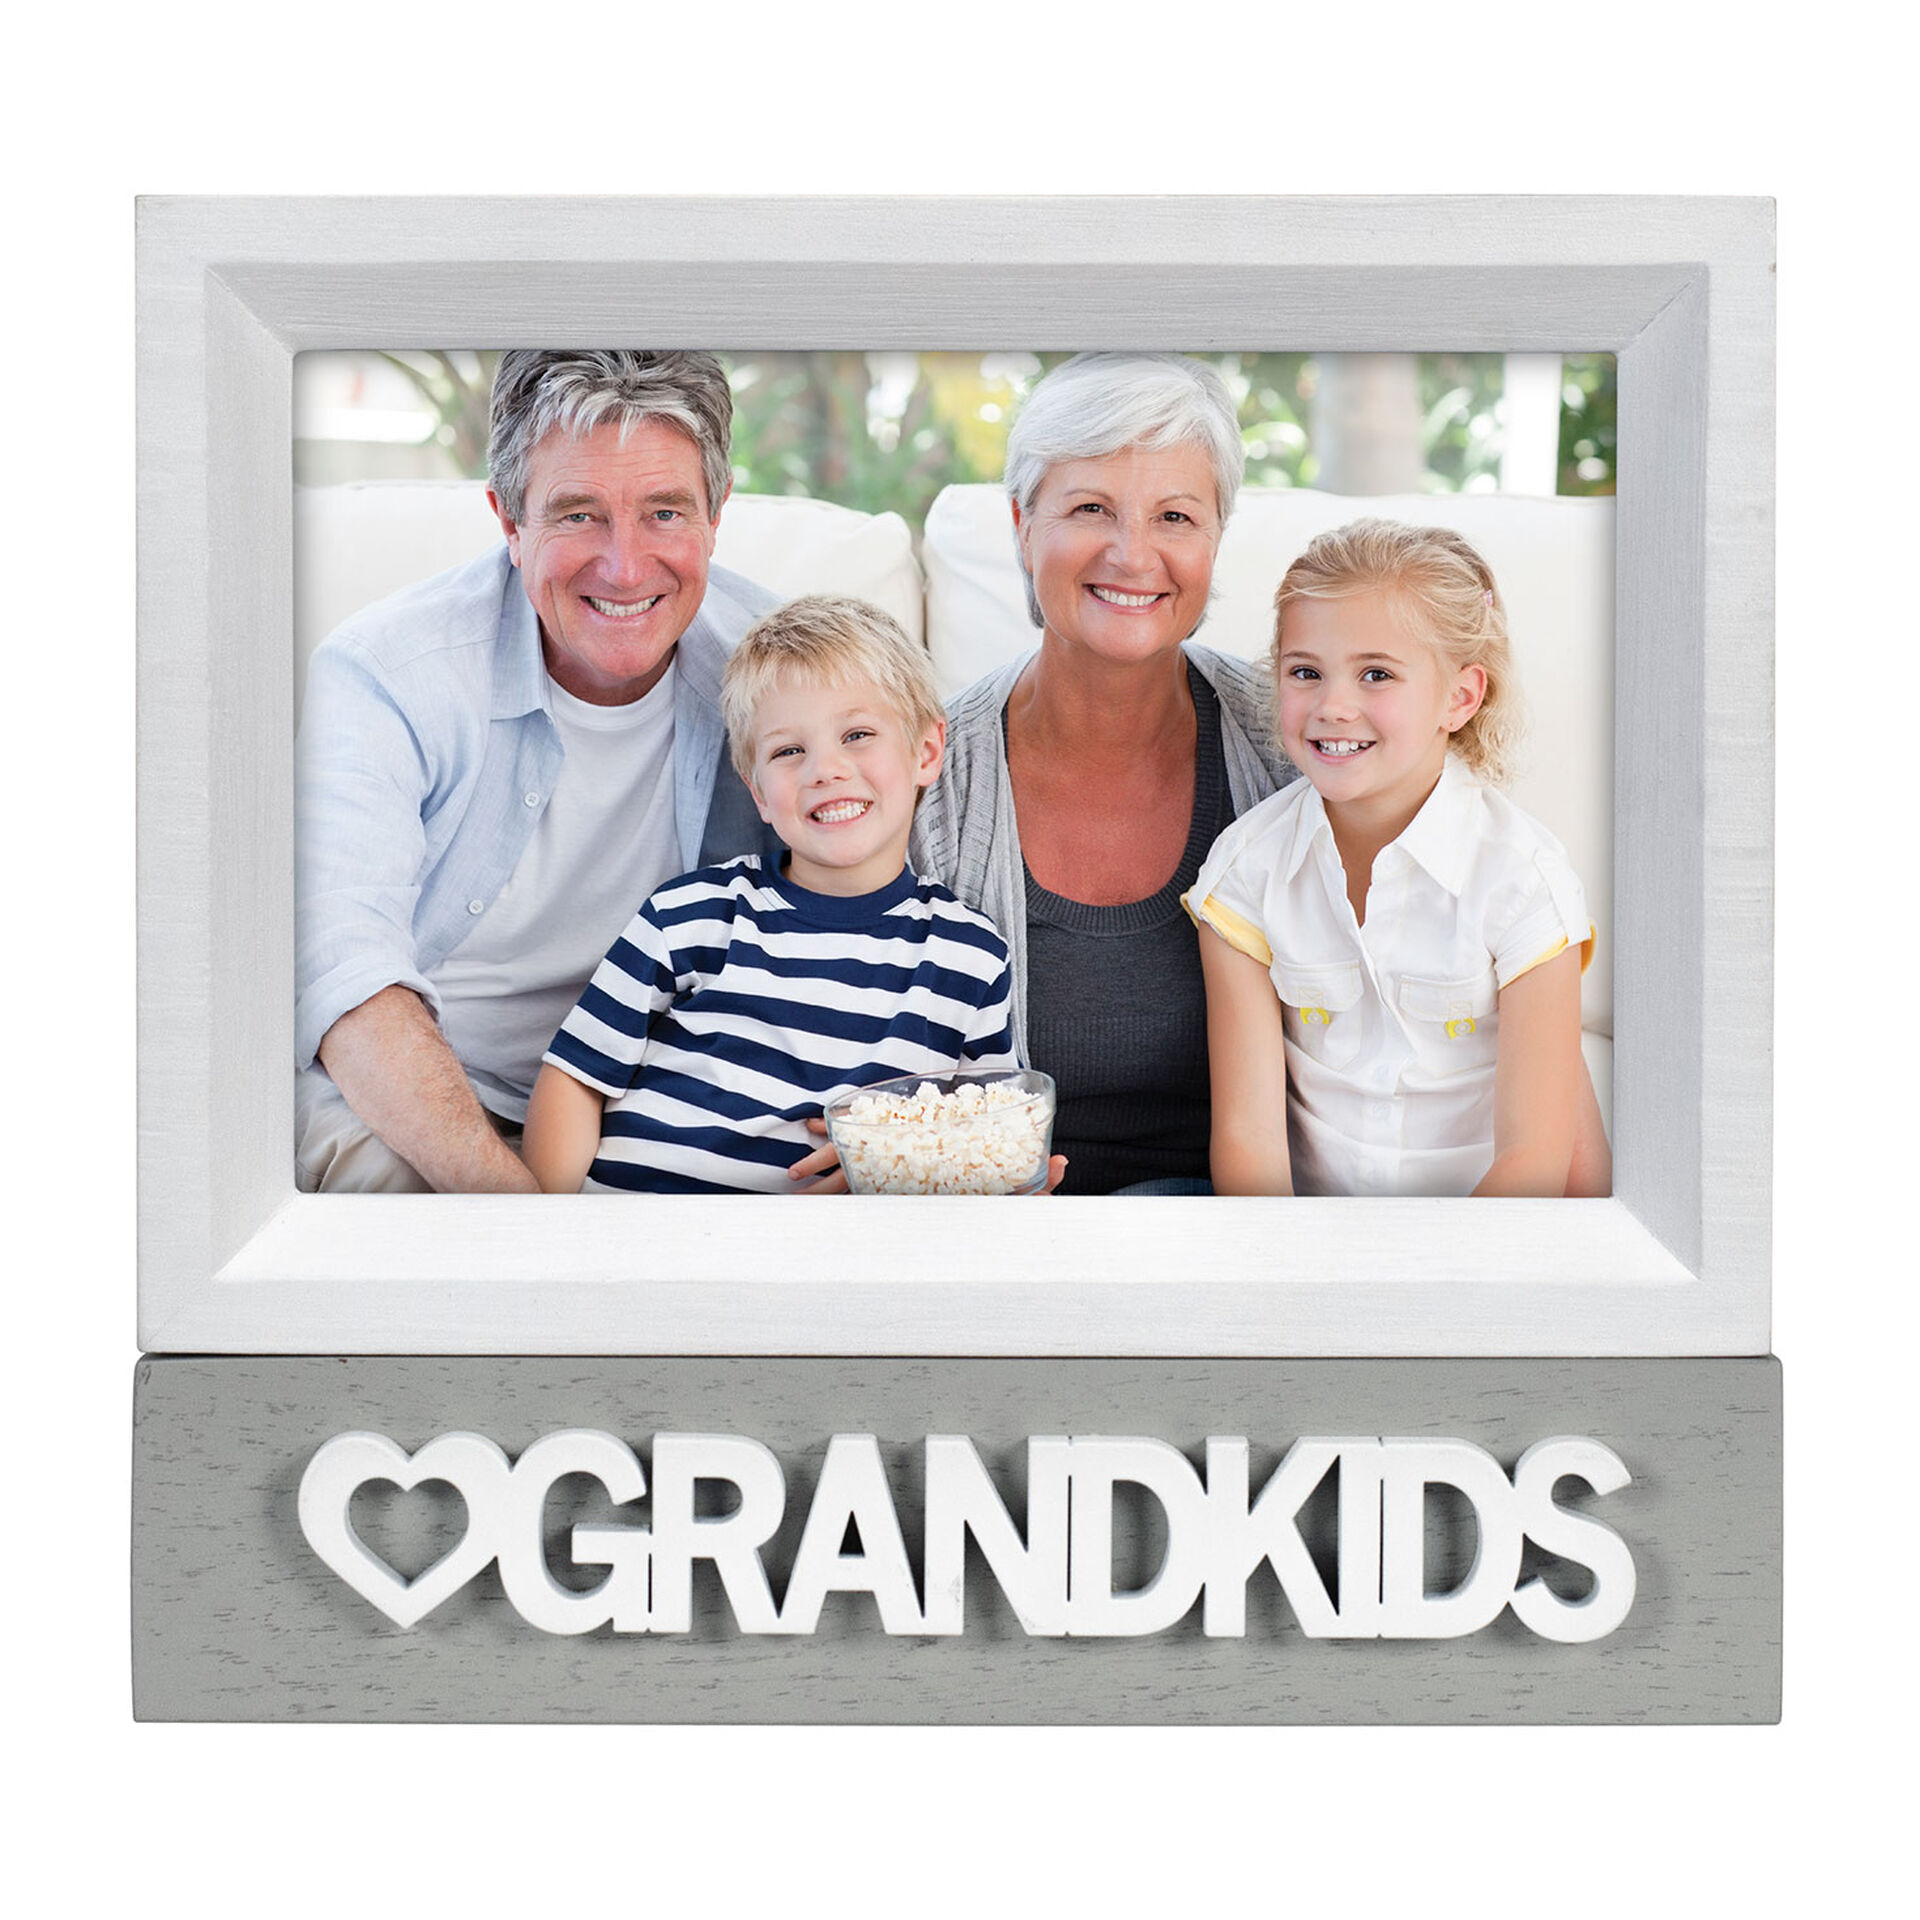 gray wooden picture frame with "grandkids" wording with an image of an older couple with two young children